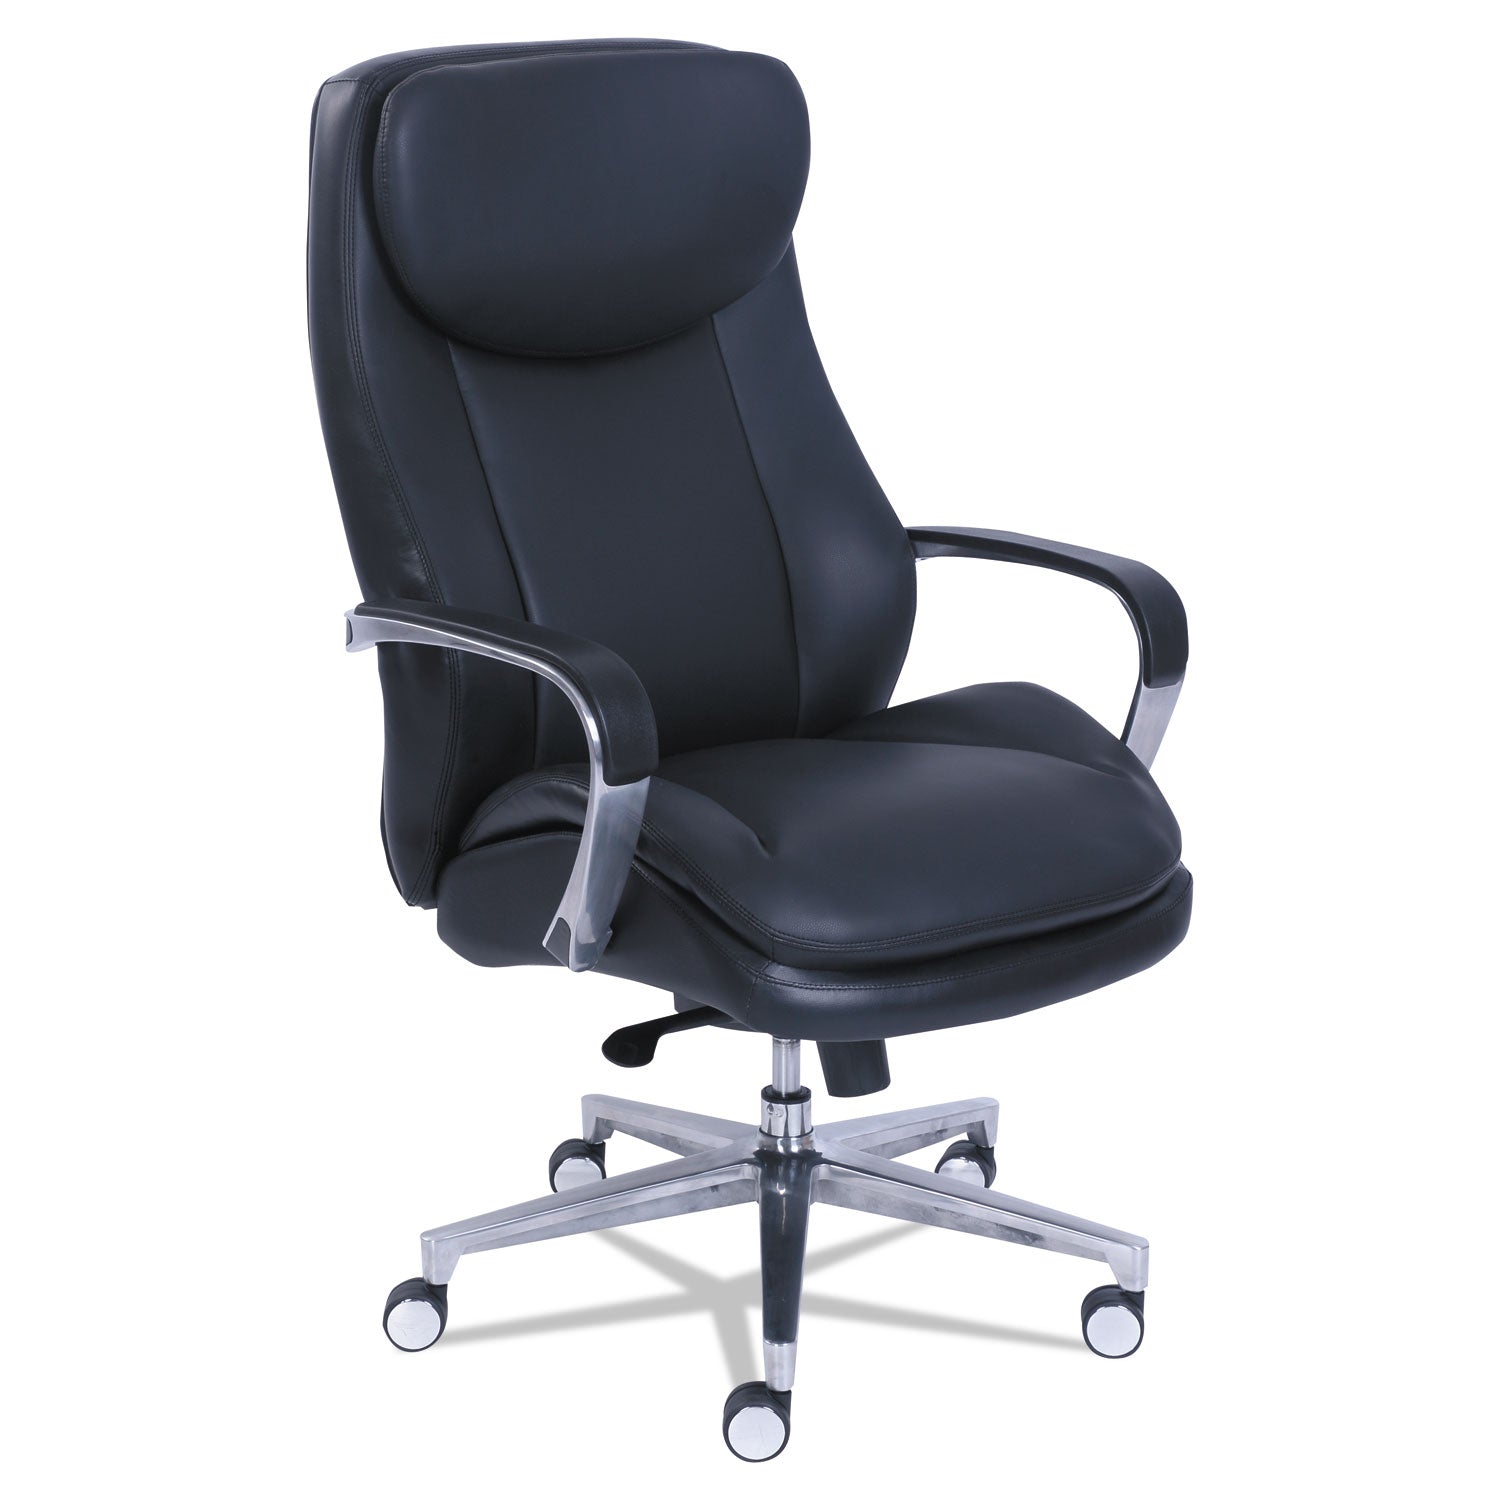 commercial-2000-high-back-executive-chair-supports-up-to-300-lb-2025-to-2325-seat-height-black-seat-back-silver-base_lzb48958 - 1